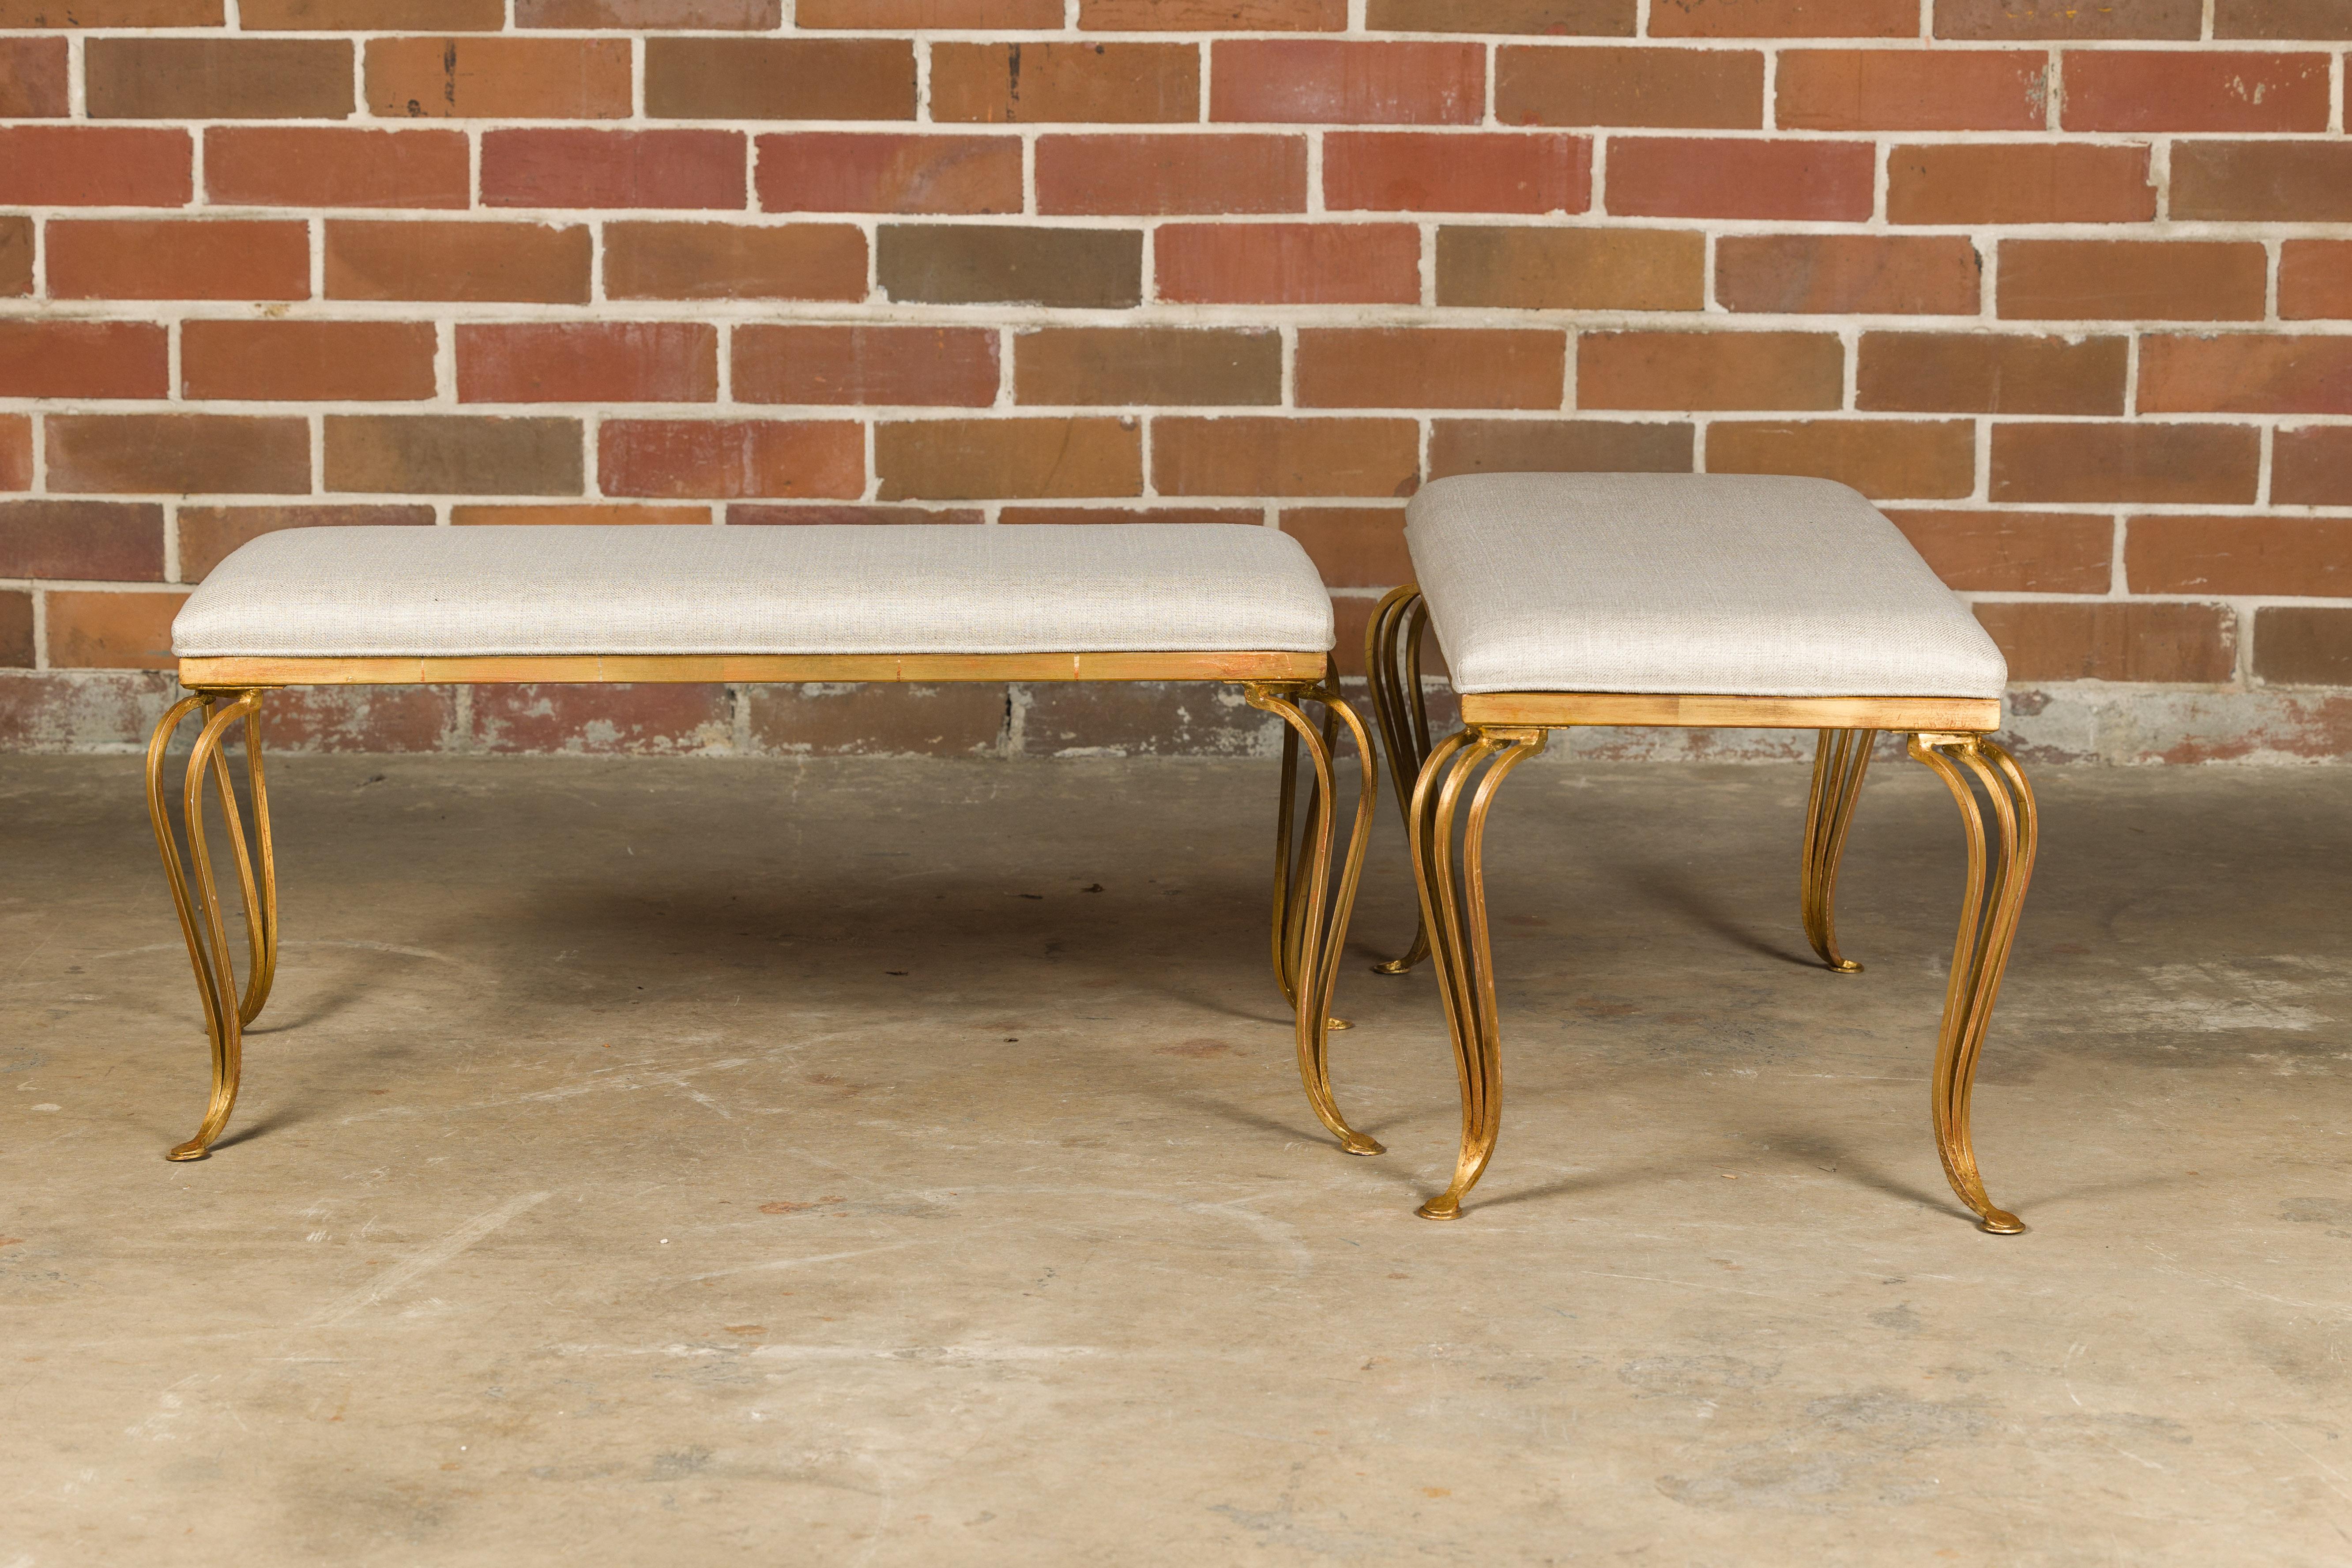 Midcentury French Gilt Metal Benches with Cabriole Legs and Upholstery, a Pair In Good Condition For Sale In Atlanta, GA